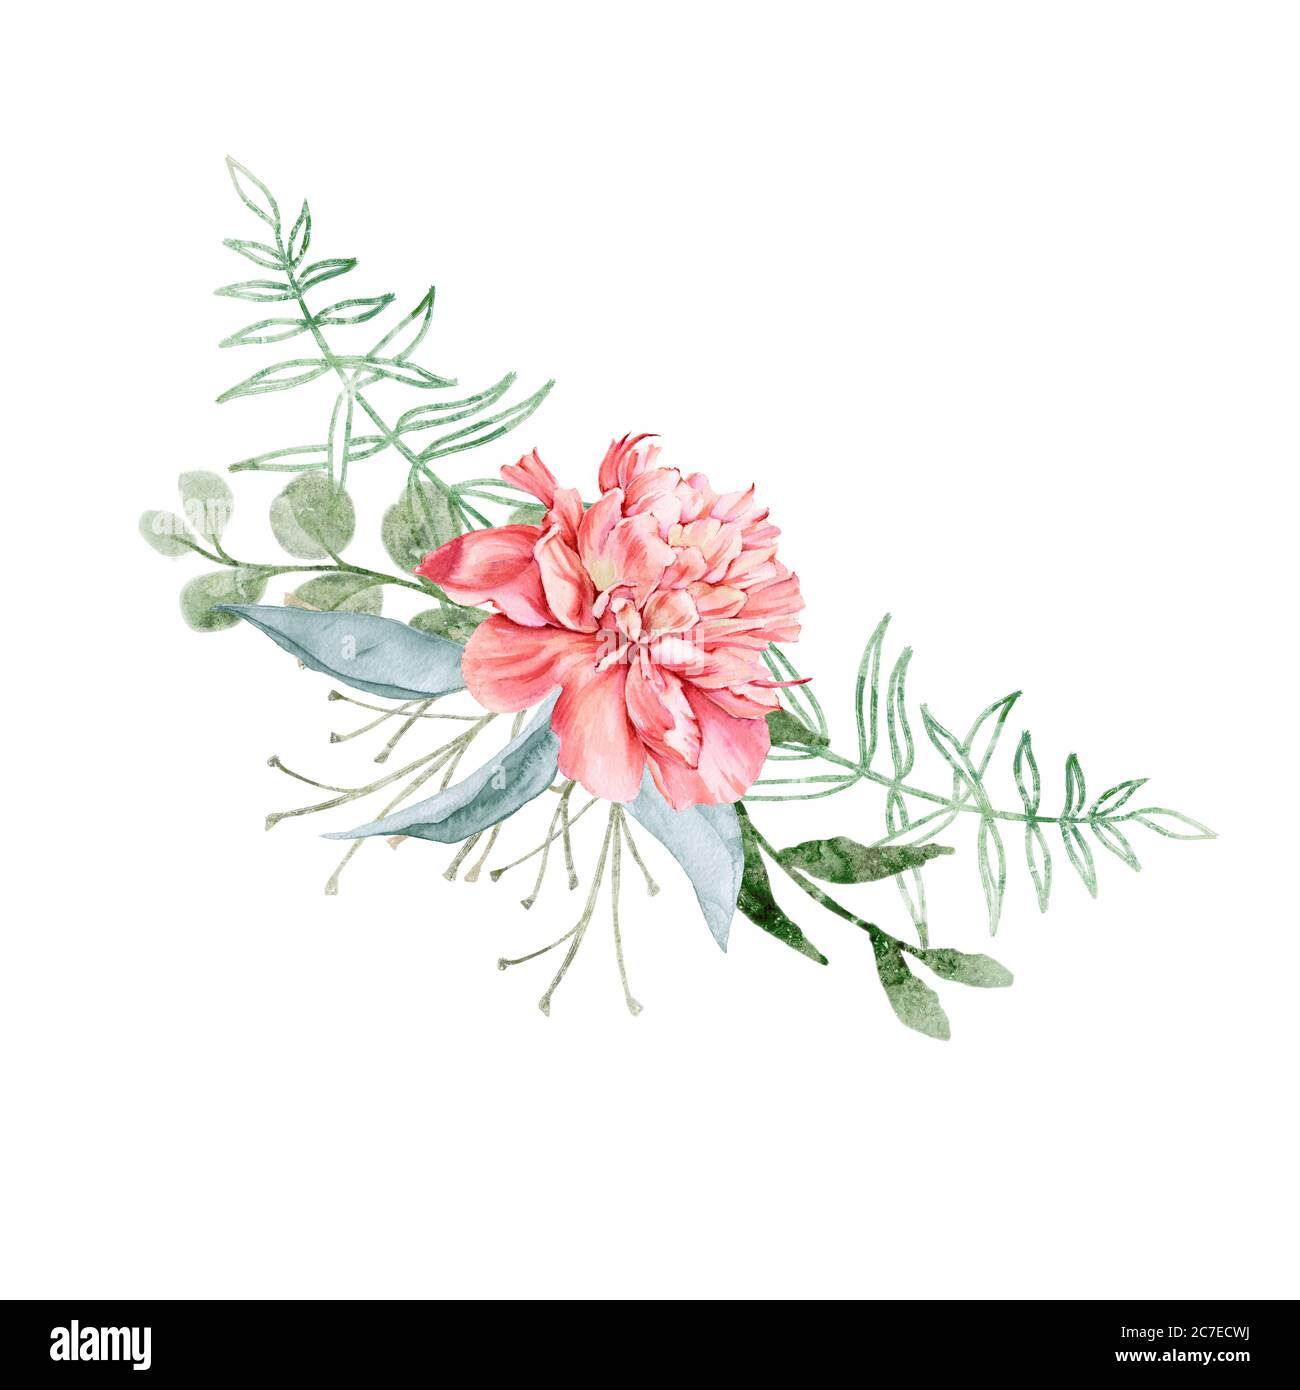 Bouquet of peony flowers. Isolated drawing. Stock Photo